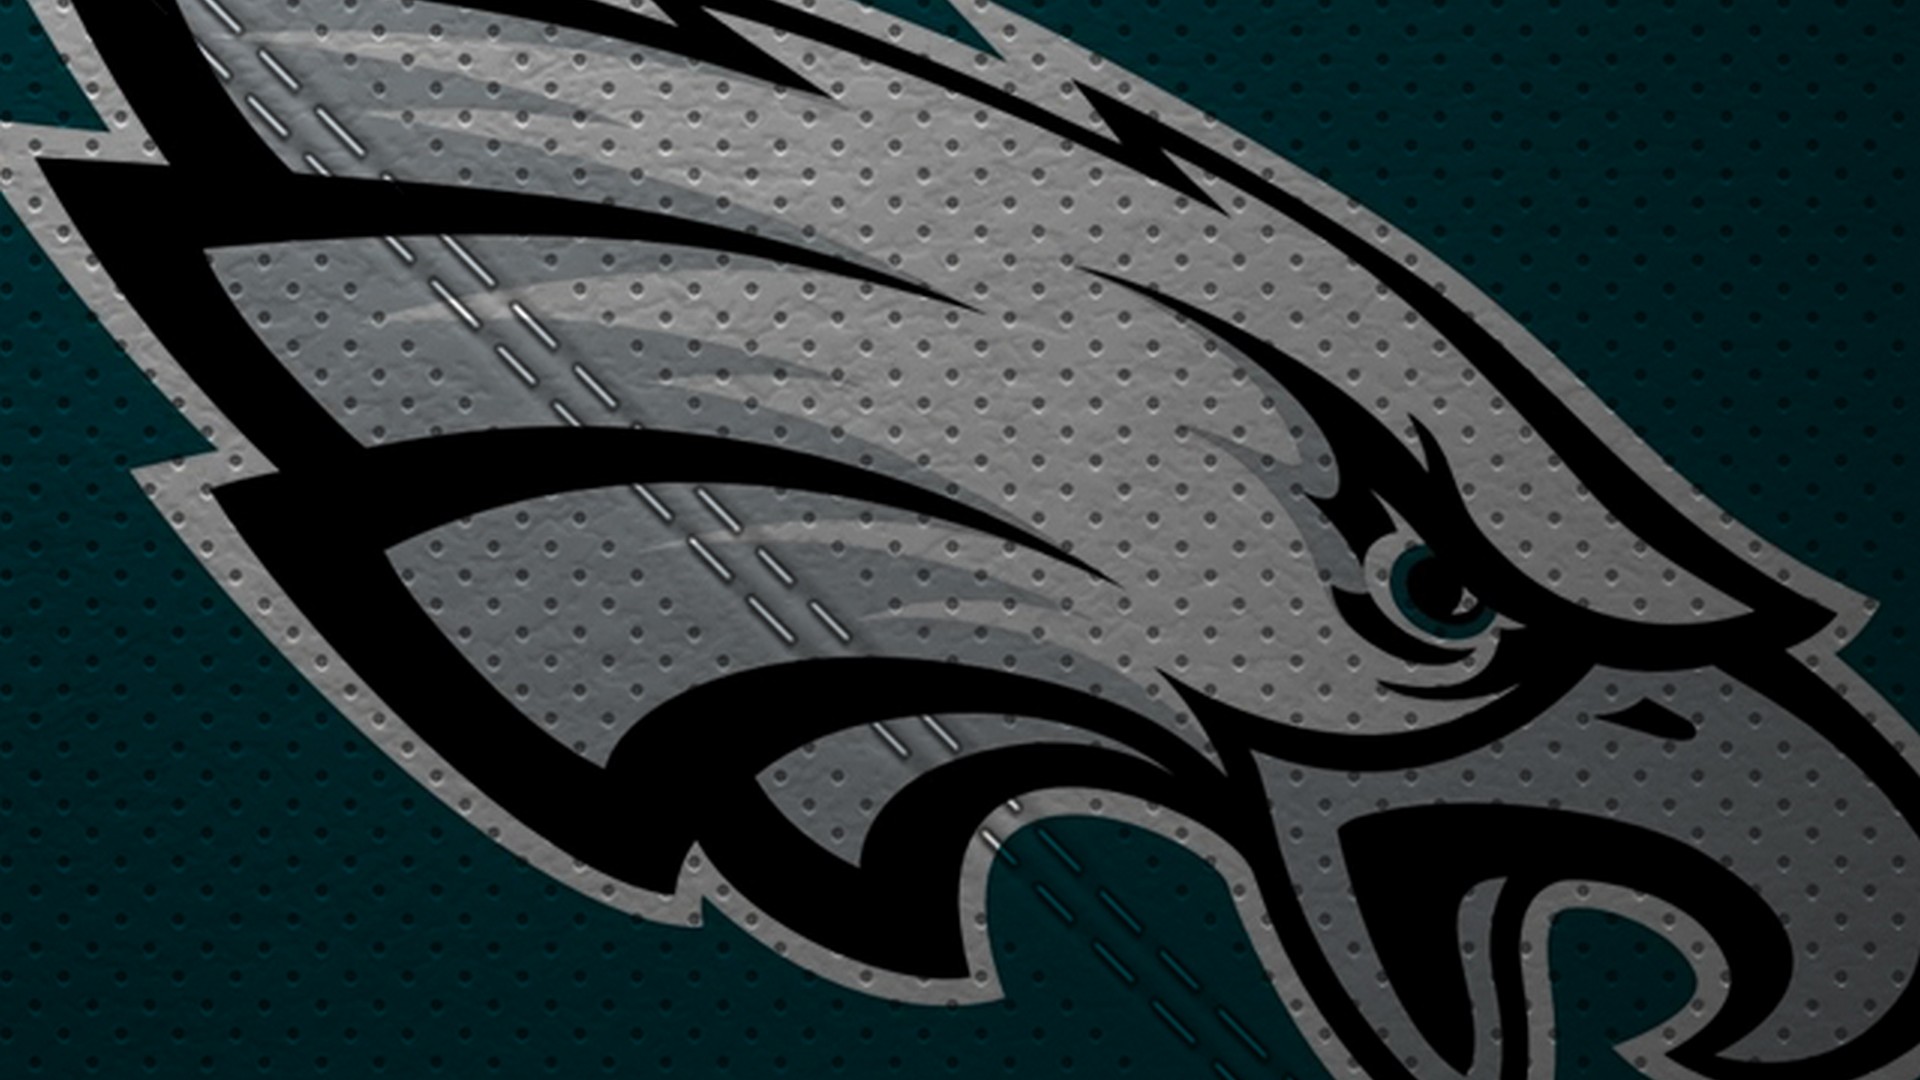 The Eagles Wallpaper HD With Resolution 1920X1080 pixel. You can make this wallpaper for your Mac or Windows Desktop Background, iPhone, Android or Tablet and another Smartphone device for free